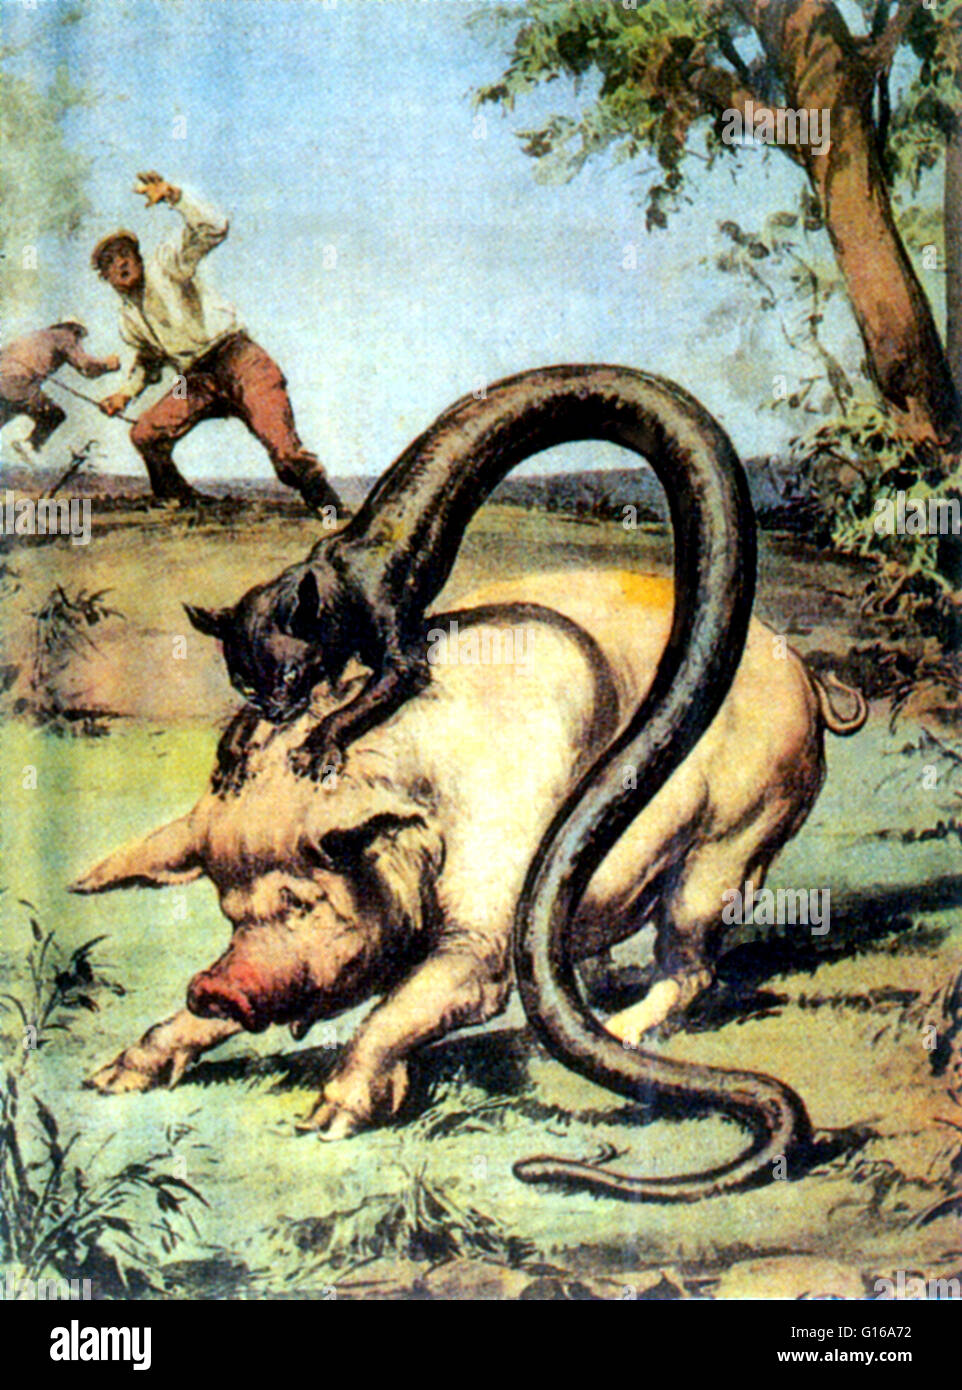 In Alpine folklore, the Tatzelwurm is a stubby, lizard-like creature. It takes the appearance of a cat with the hind-end of a serpent with no hind legs. It is rumored to live in several areas of Europe, including the Austrian, Bavarian, Italian and Swiss Stock Photo